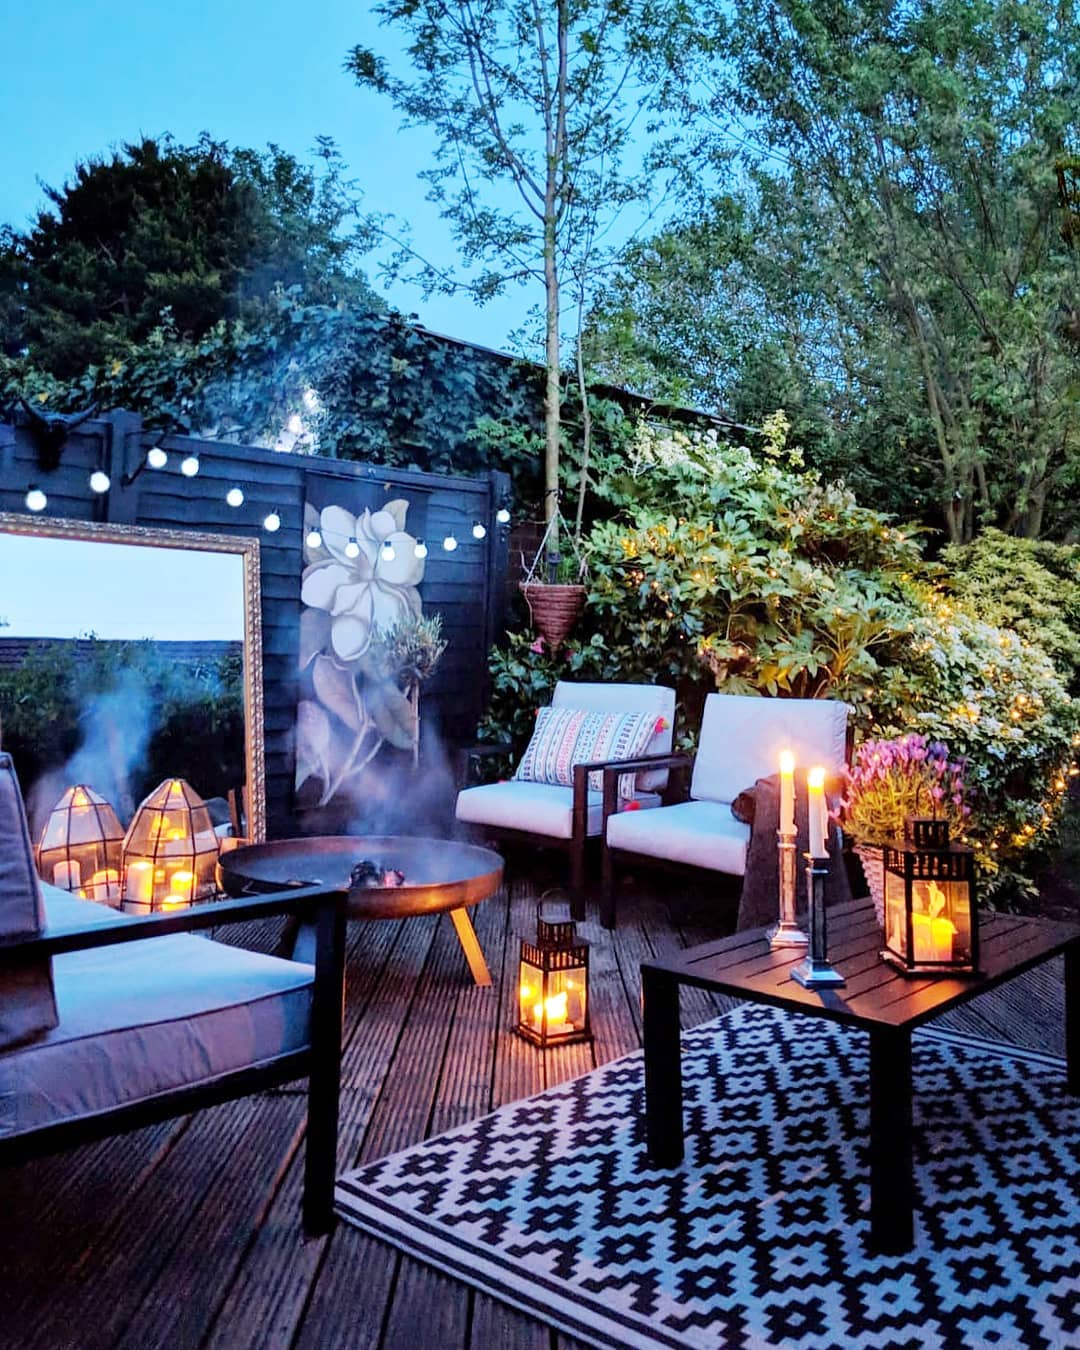 https://www.extraspace.com/blog/wp-content/uploads/2018/05/patio-home-features-buyers-want.jpg